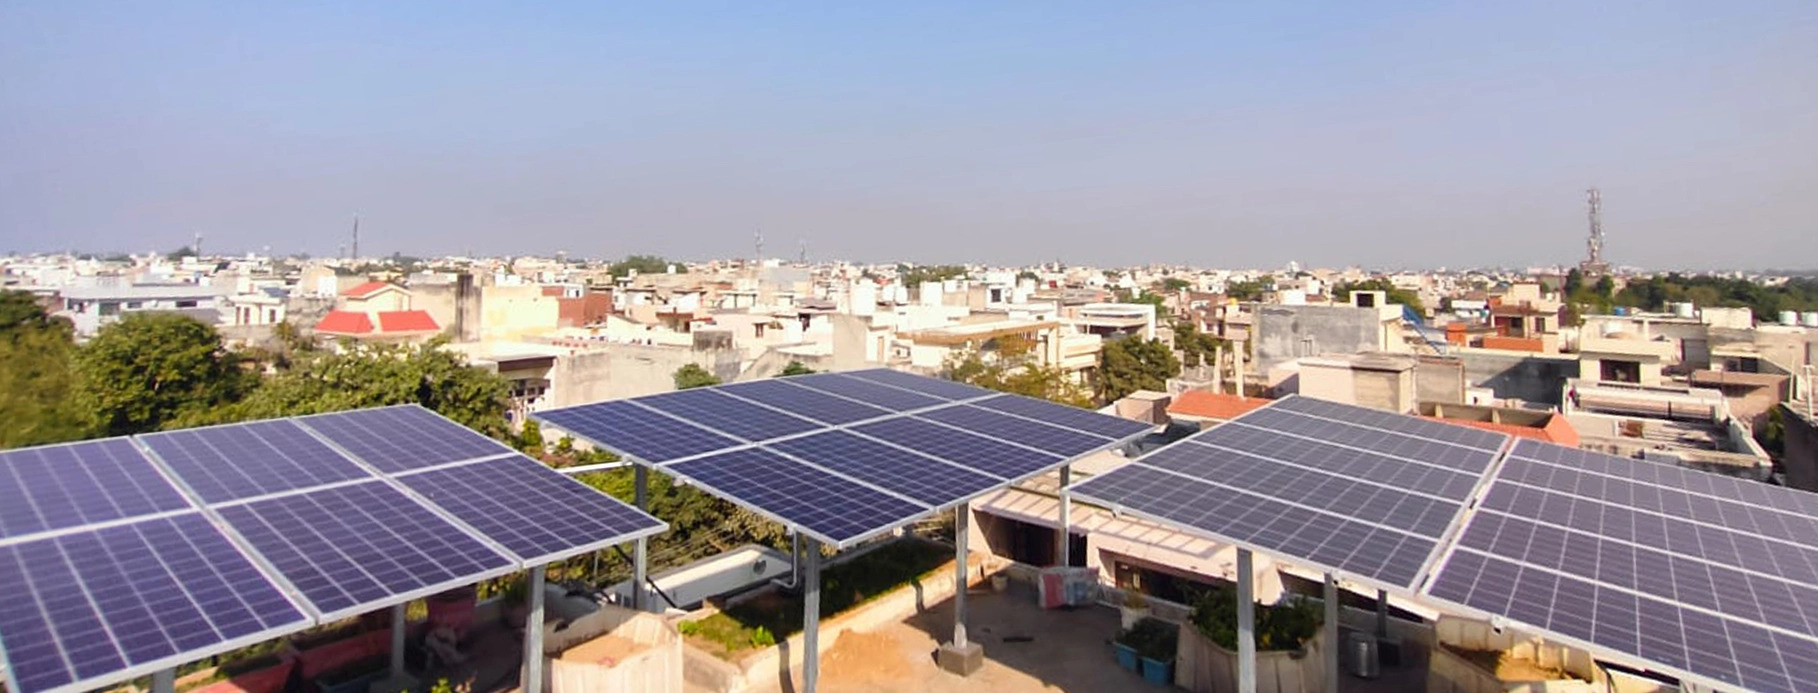 solar-rooftop-system-lucknow-india